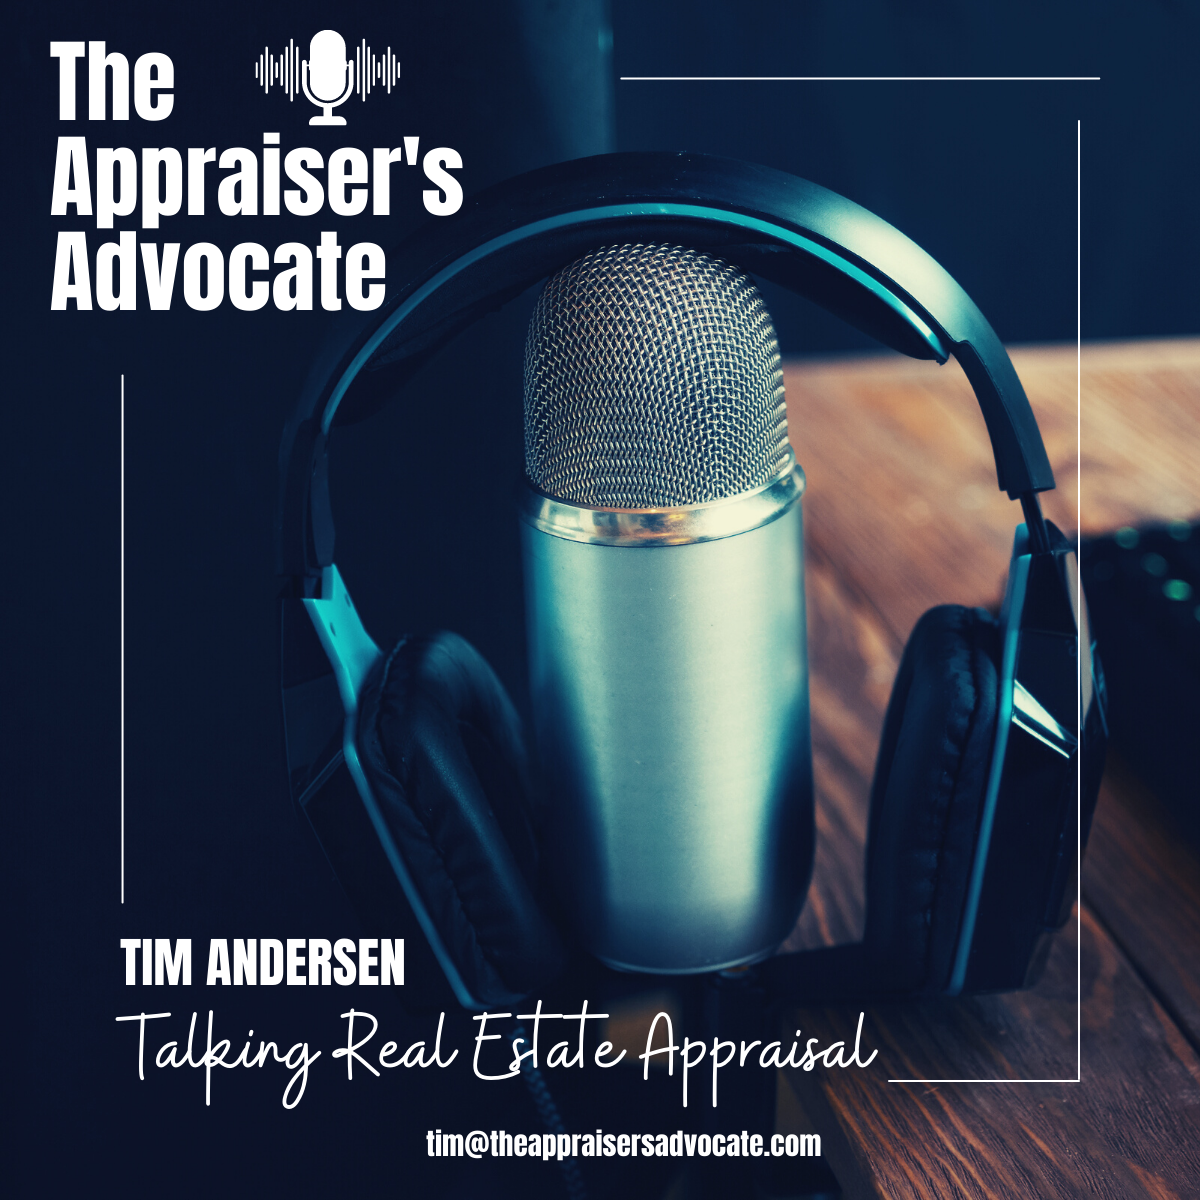 The Appraiser's Advocate Tim Anderson is a wealth of knowledge when it comes to the appraiser profession. A must listen to podcast for appraisers. 